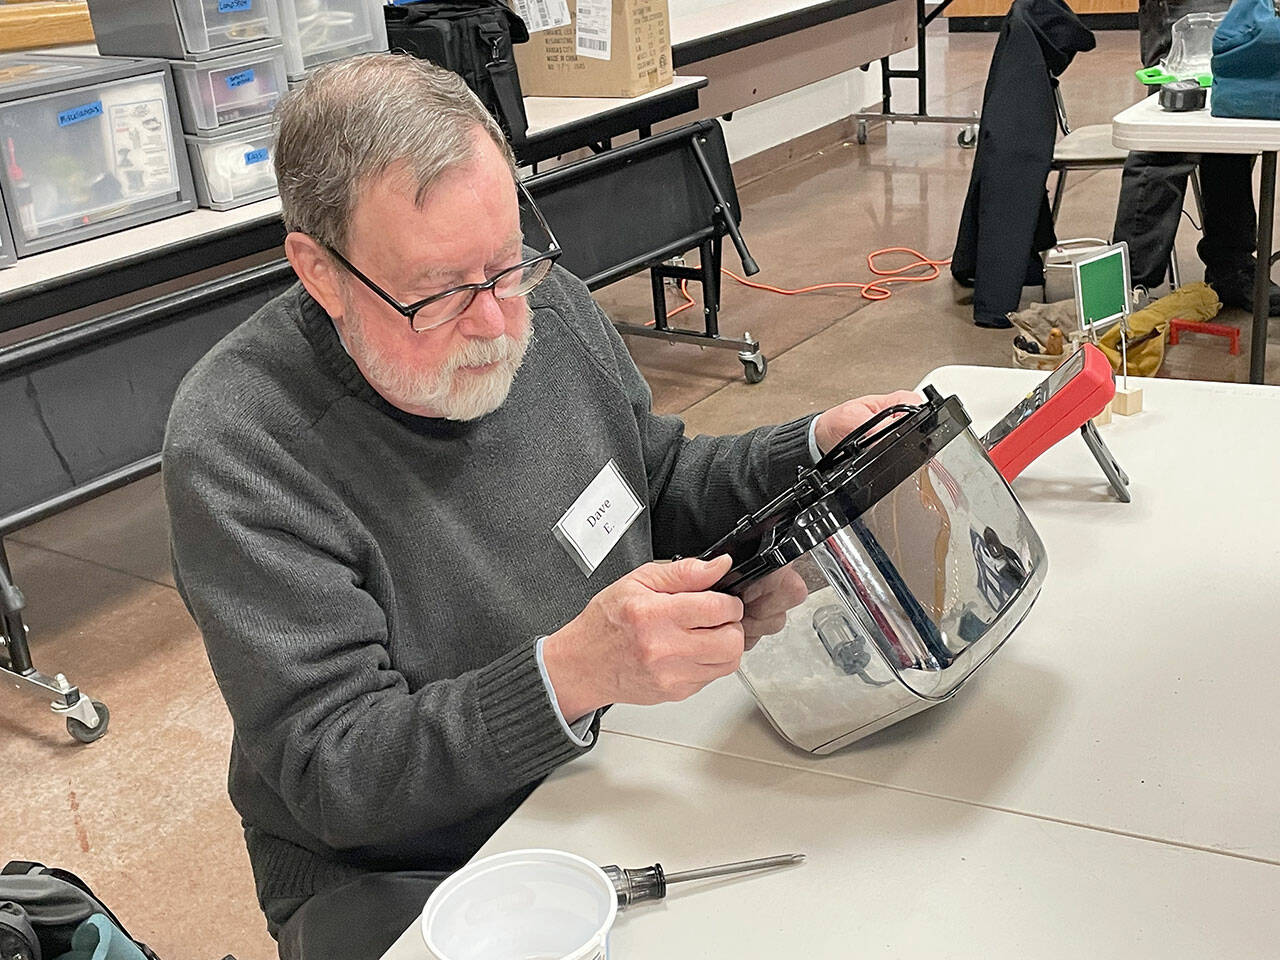 Dave Ehnesbusake examines a toaster that won’t work at the Port Townsend Marine Science Center’s Repair Cafe on March 11. This is the second year Ehnesbuske has volunteered at the event, which promotes repairing items rather than throwing them away, sharing knowledge and fostering community. (Paula Hunt/Peninsula Daily News)